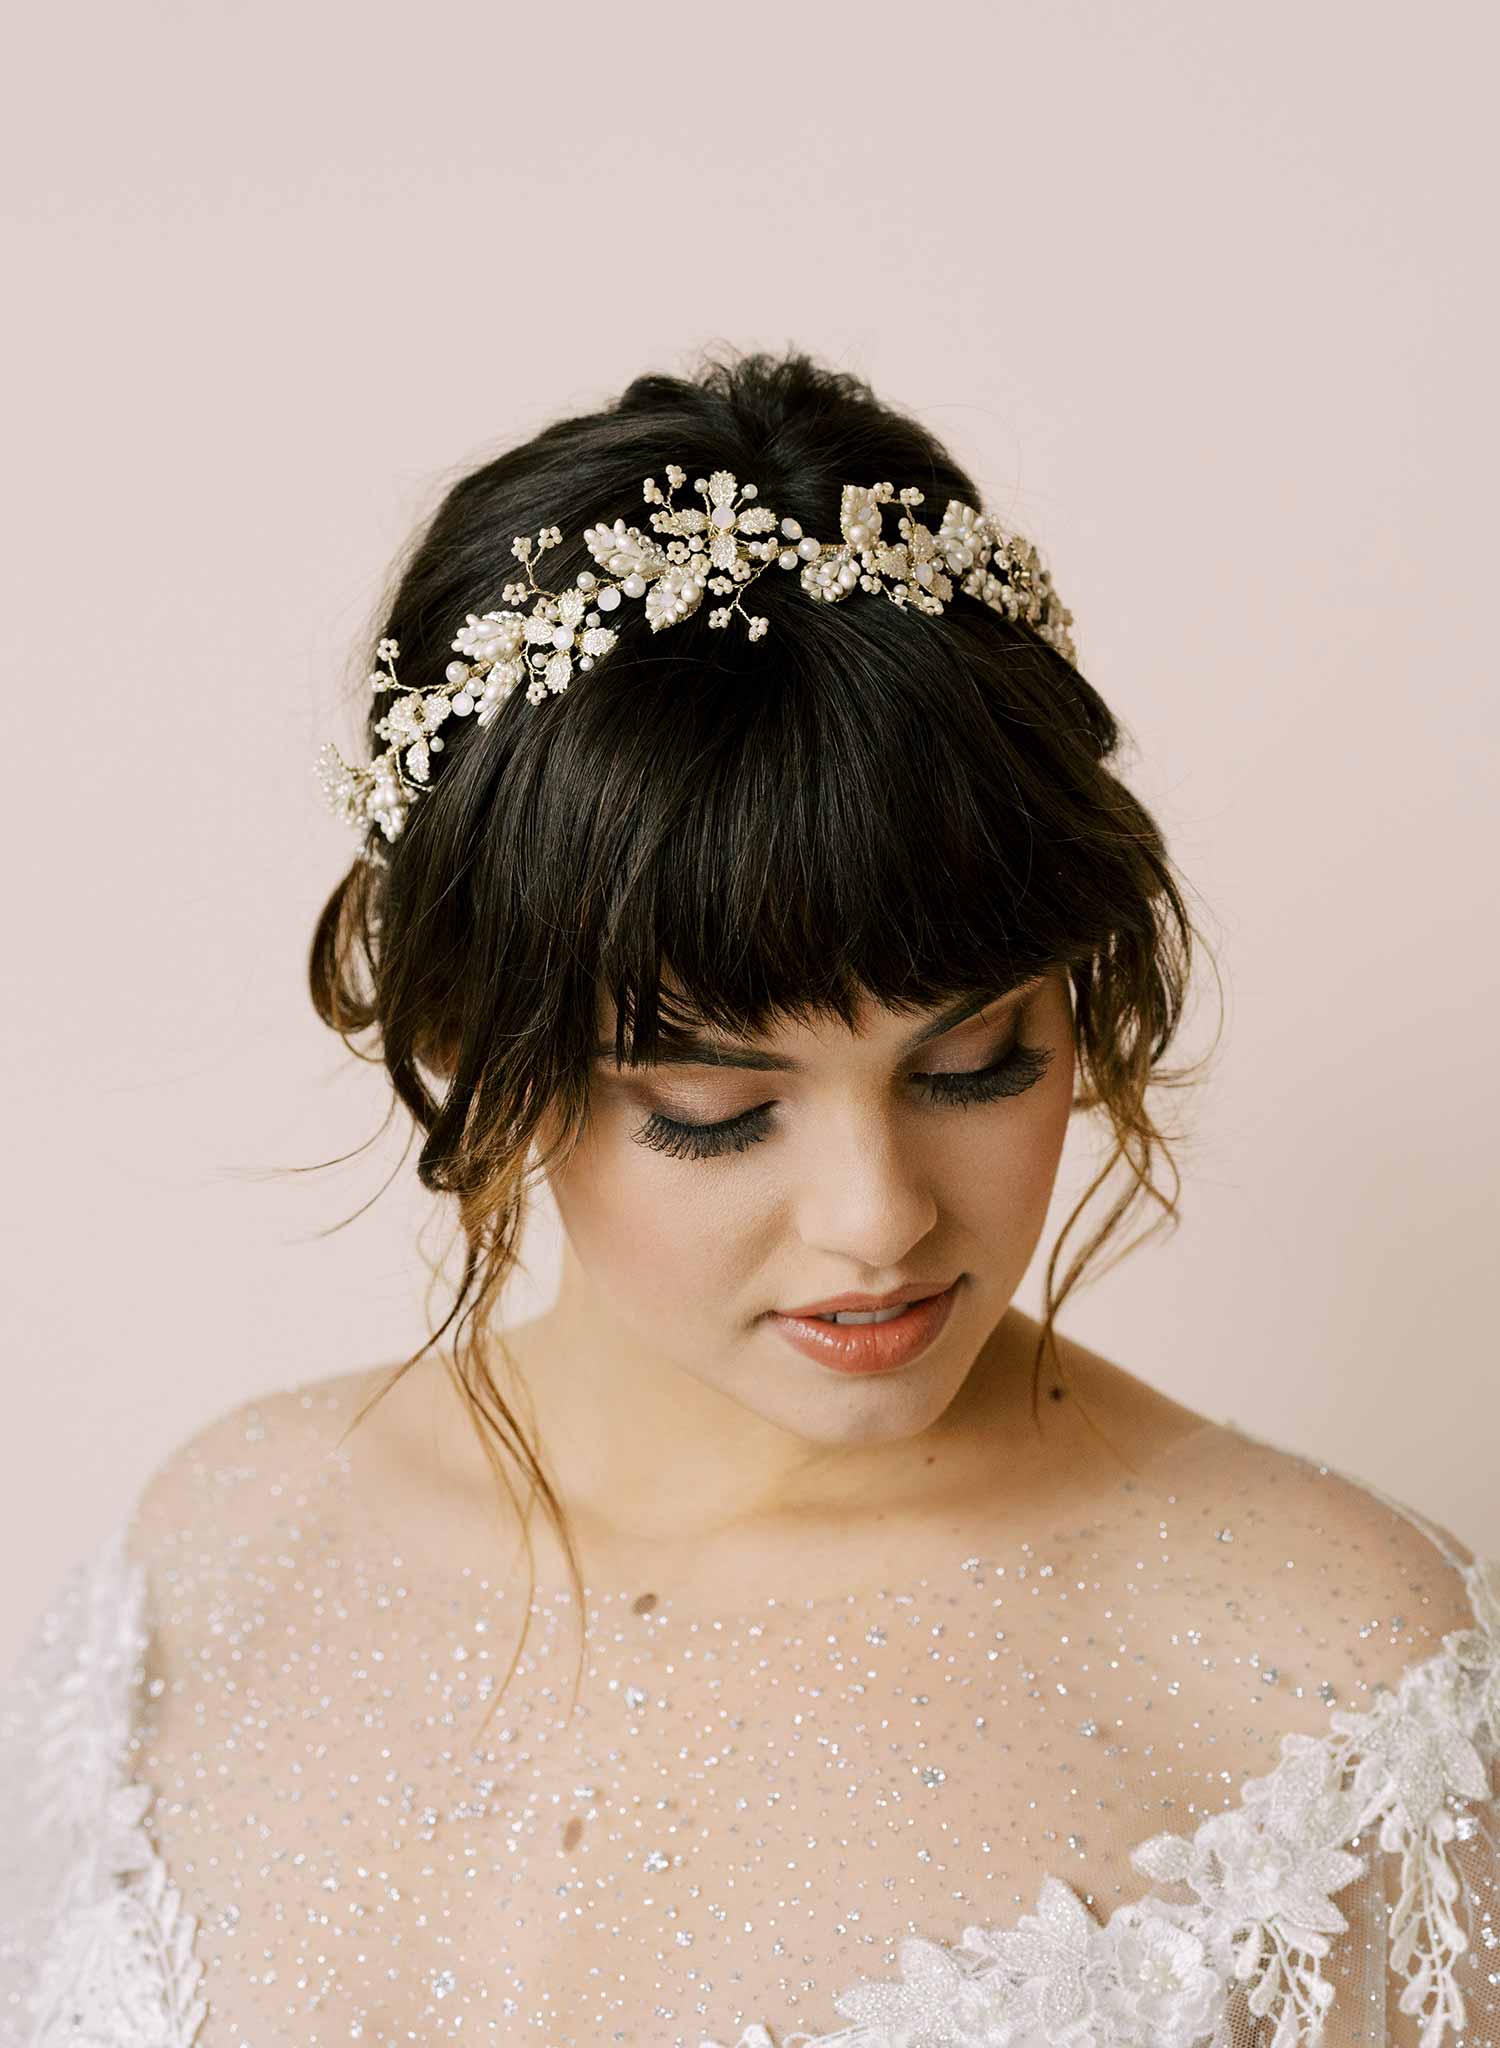 Enchanted bead and floral headband - Style #2142